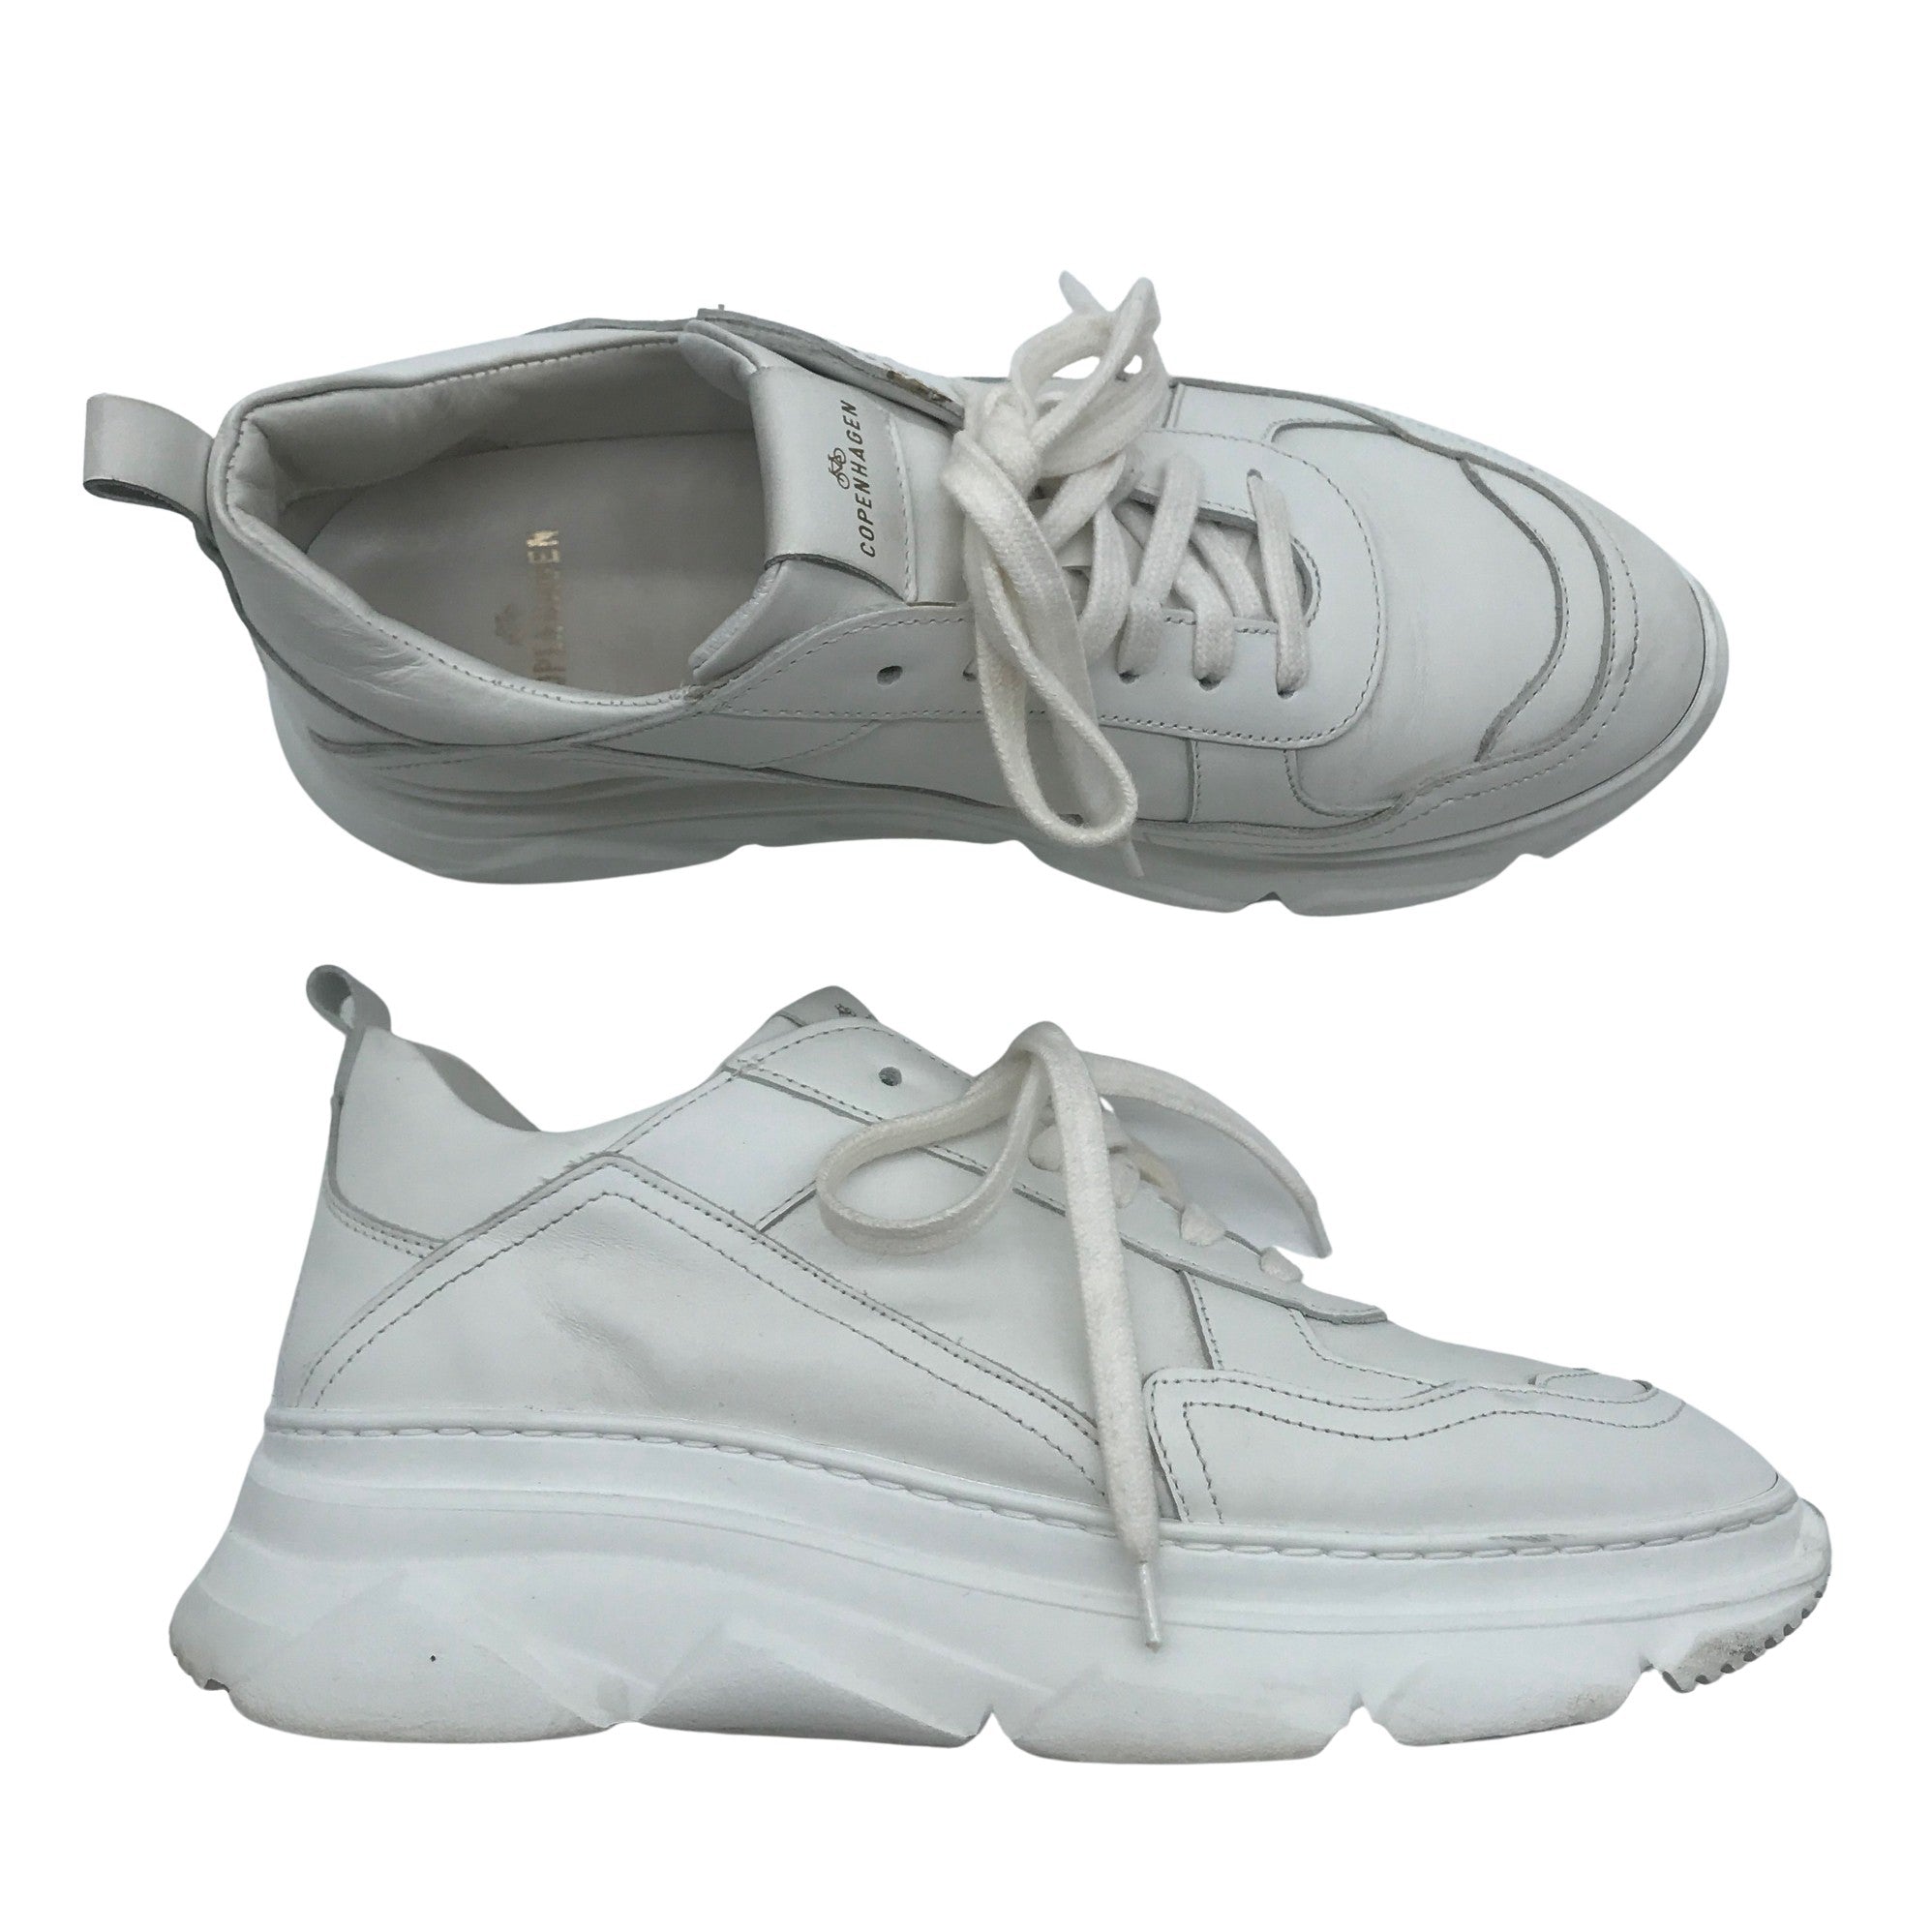 Women's shoes Sneakers, size 39 (White) | Emmy